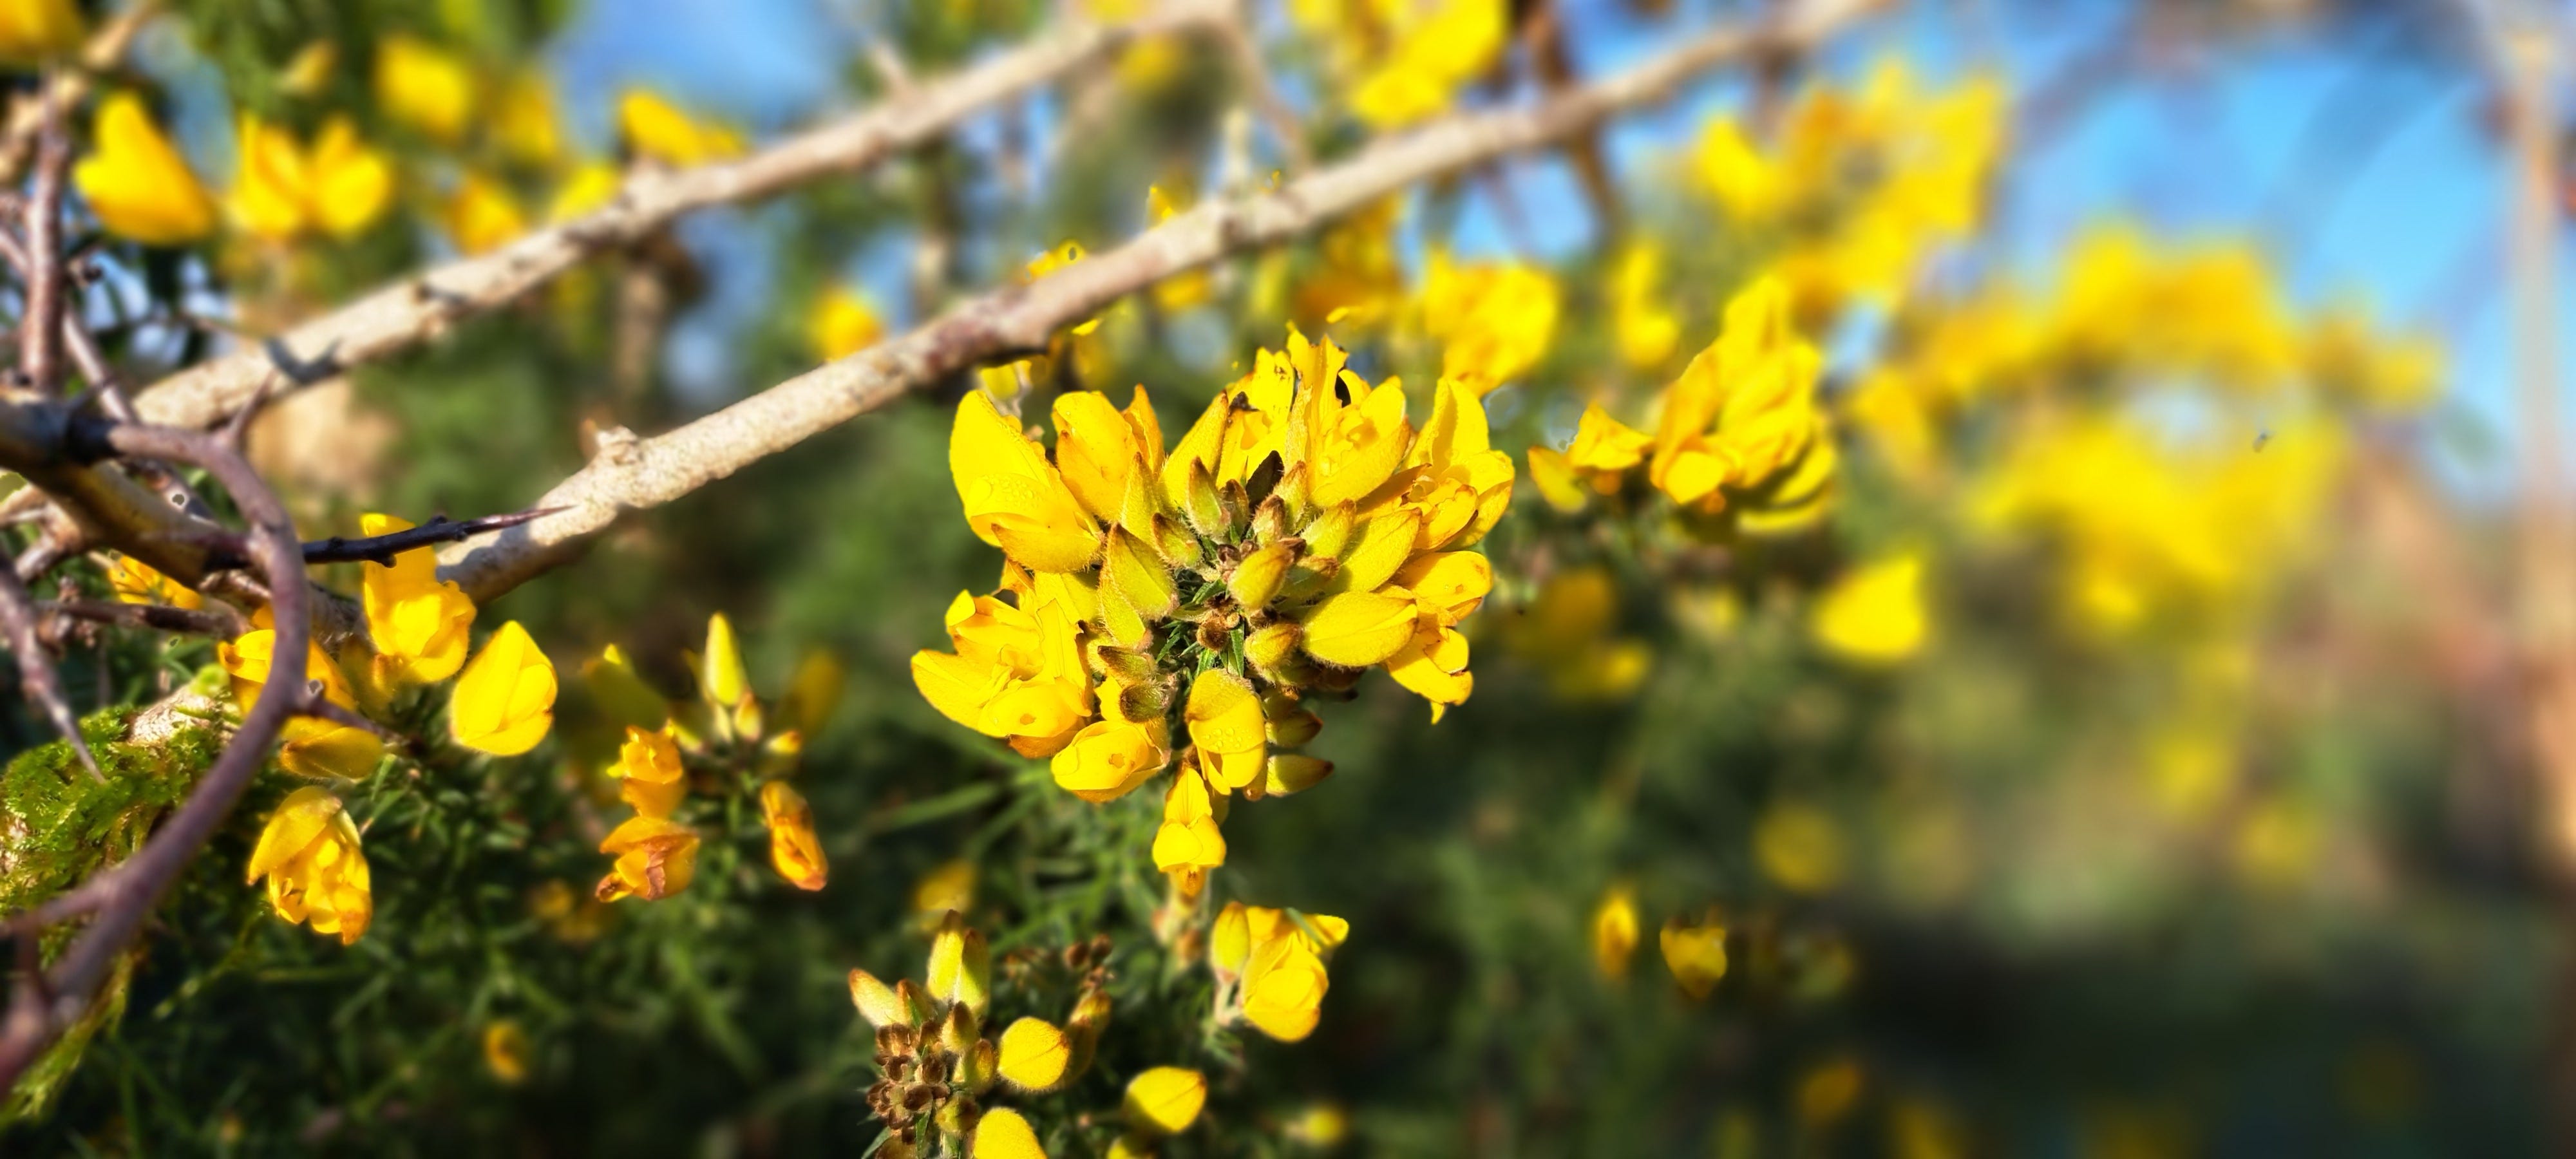 A close up image of golden-yellow gorse flowers